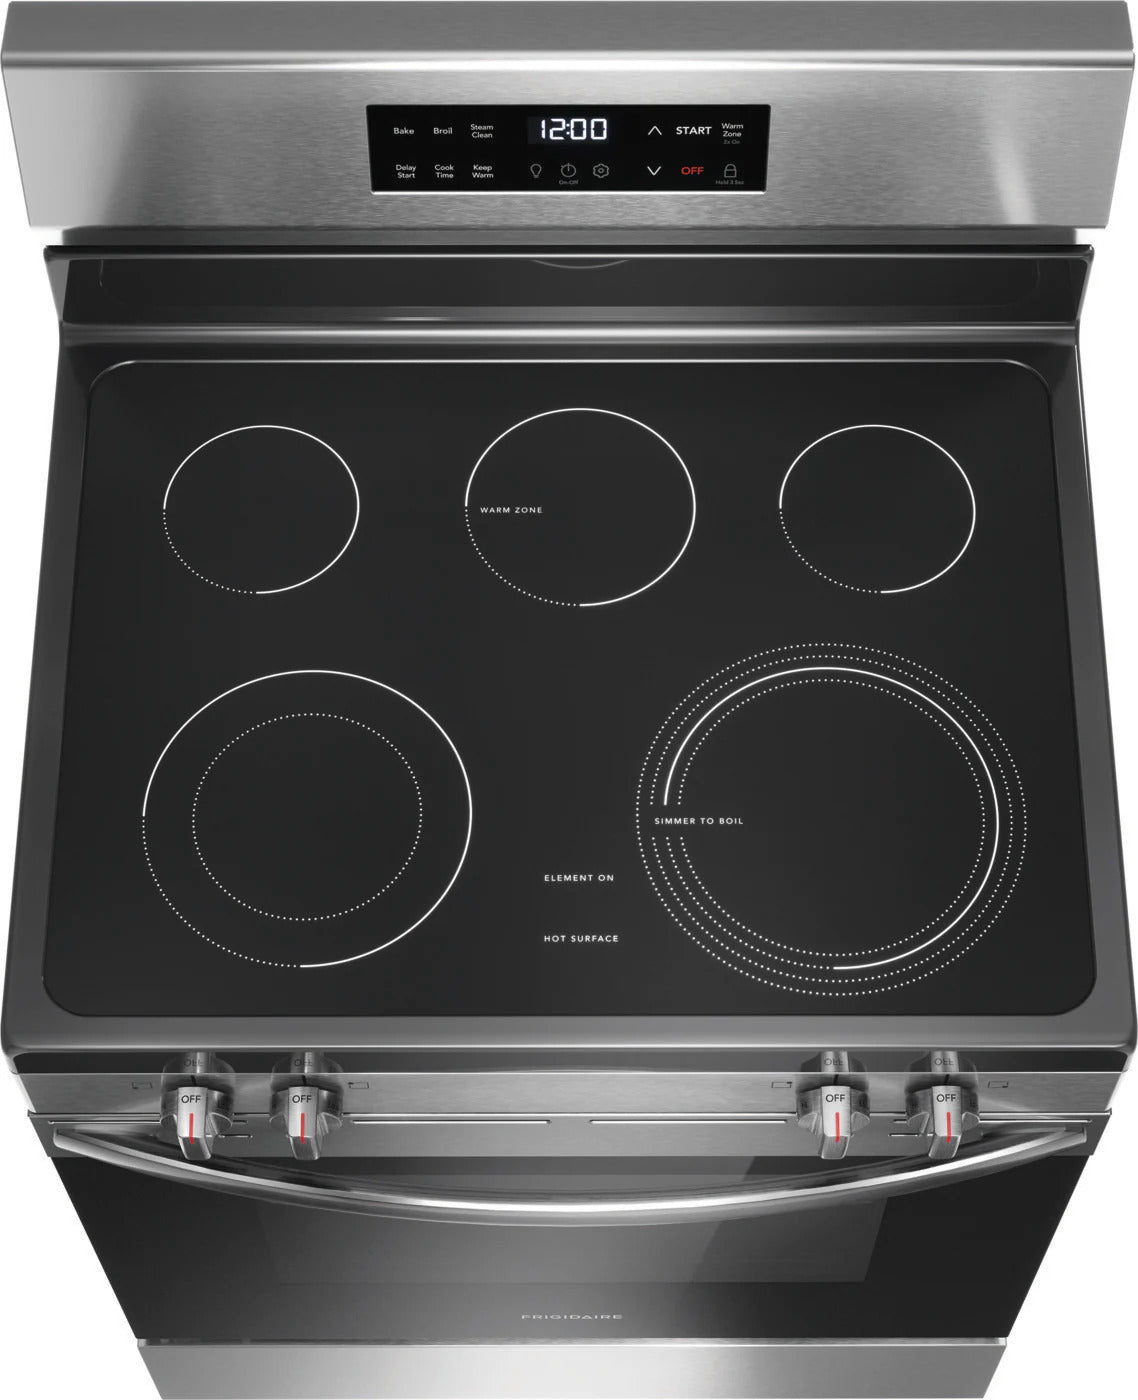 Frigidaire - 5.3 cu. ft  Electric Range in Stainless - FCRE306CAS